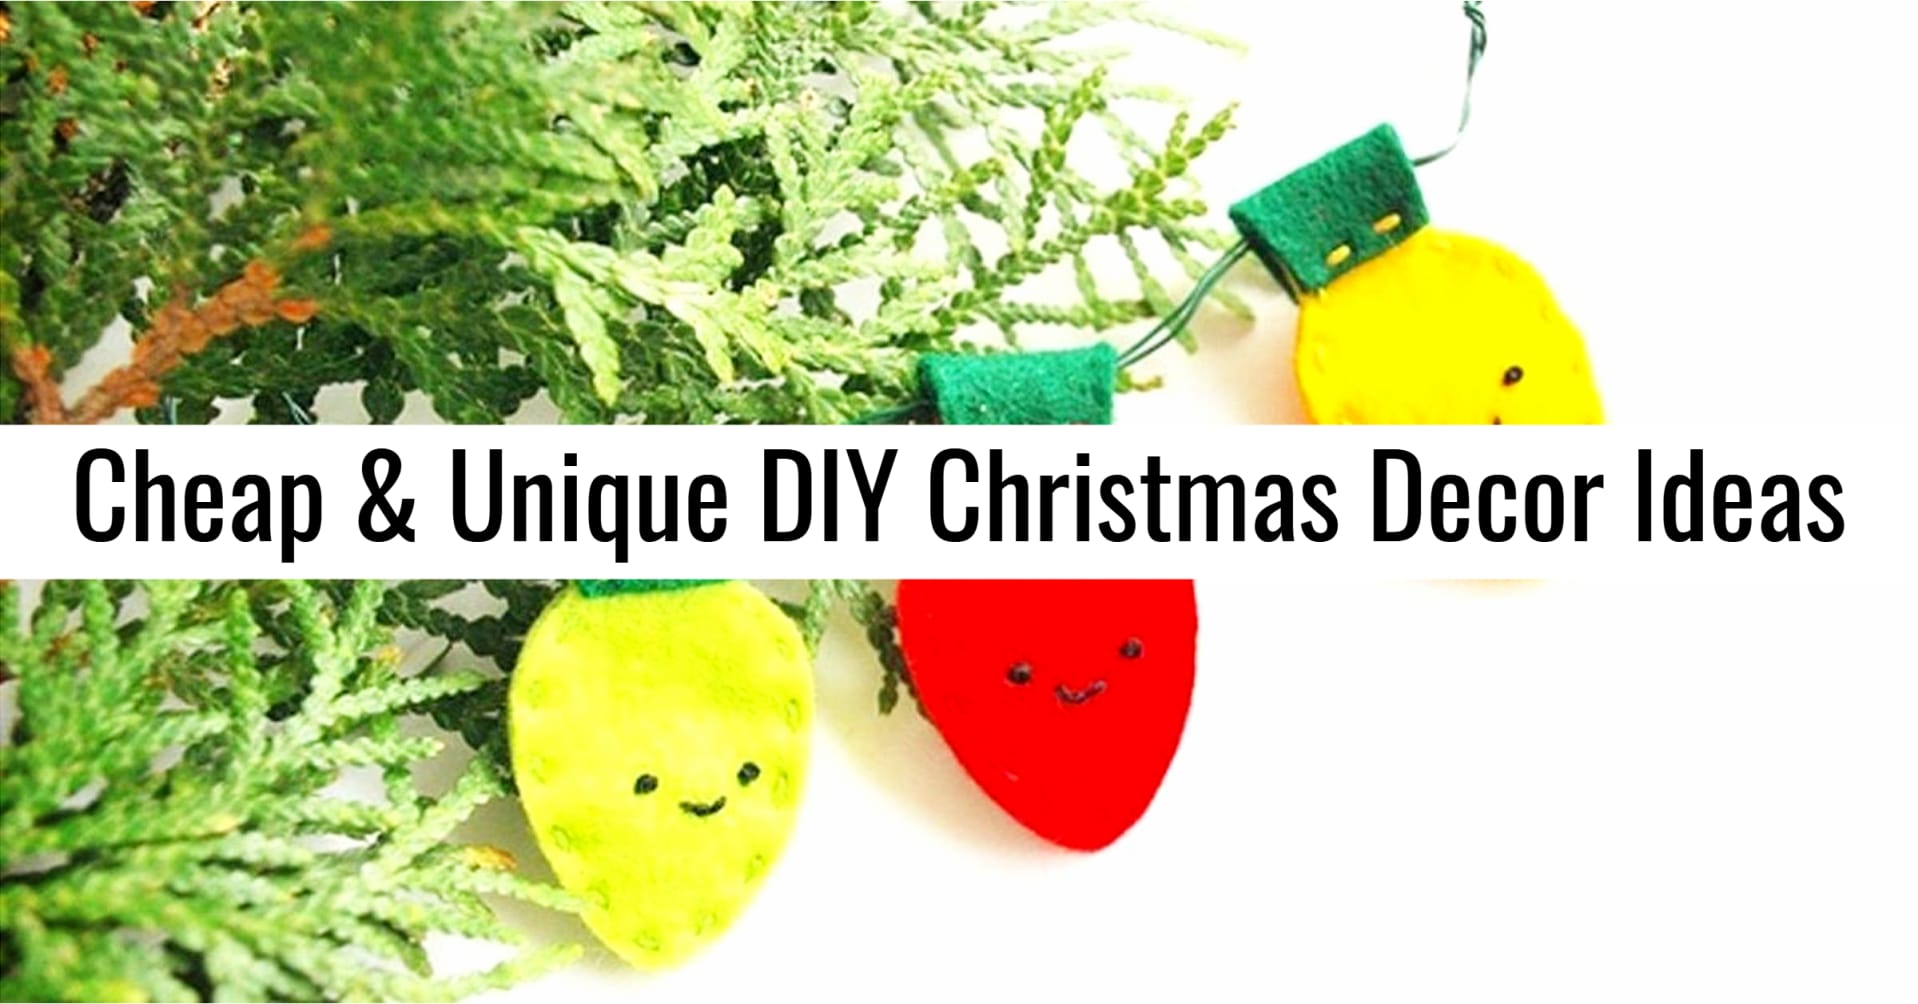 Christmas on a Budget - Cheap and Unique DIY Christmas Decor and Decorations to Make on a Tight Budget